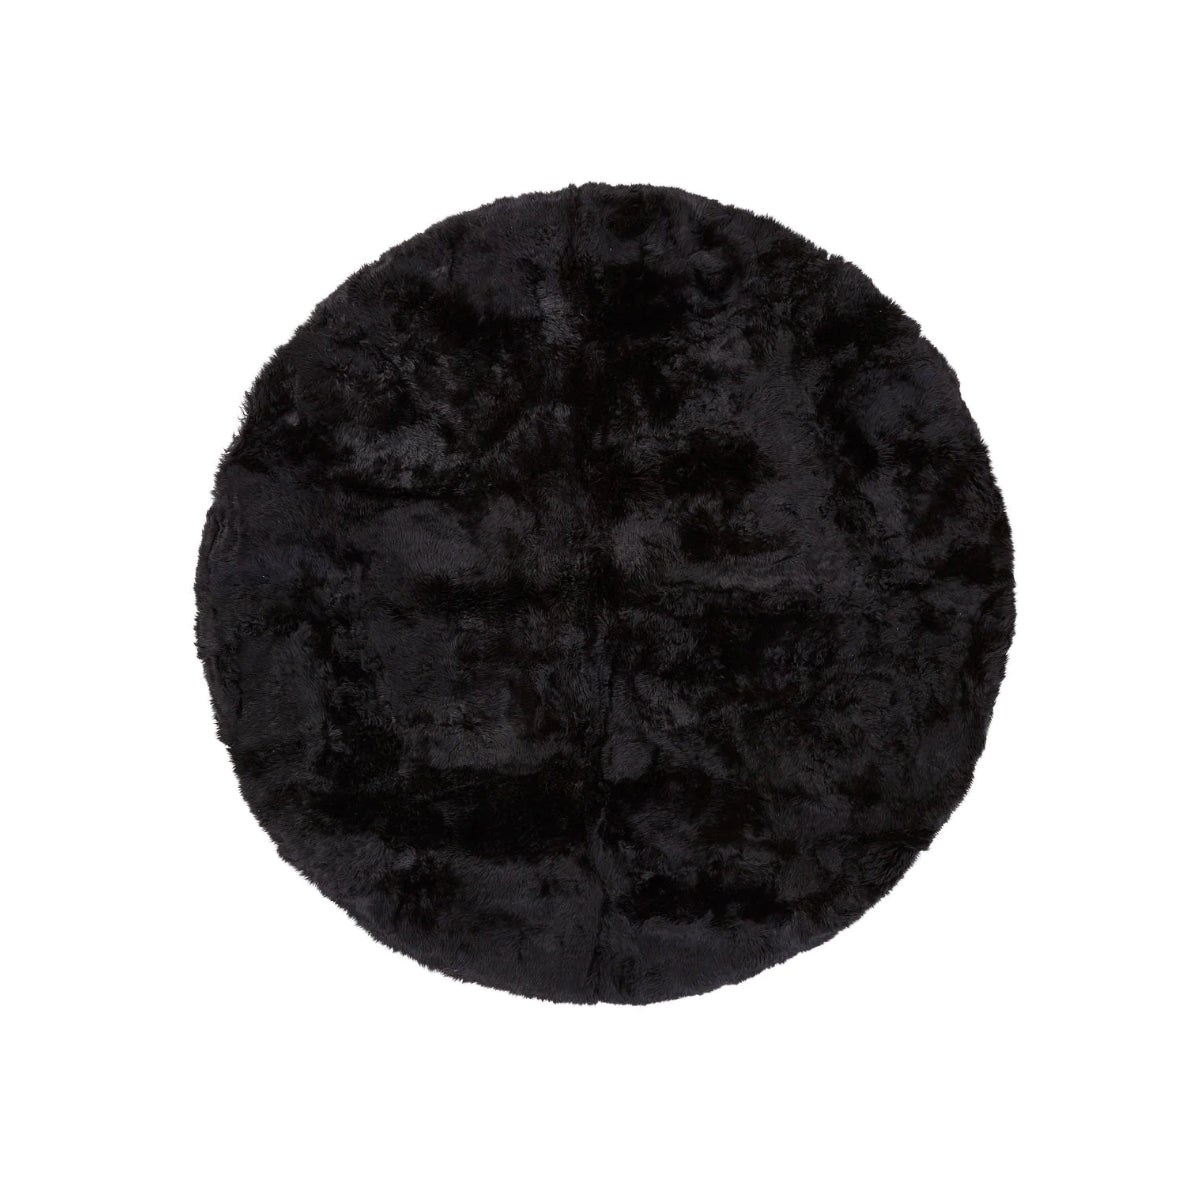 Natures Collection | Round Design Rug – Sheepskin, Long Wool